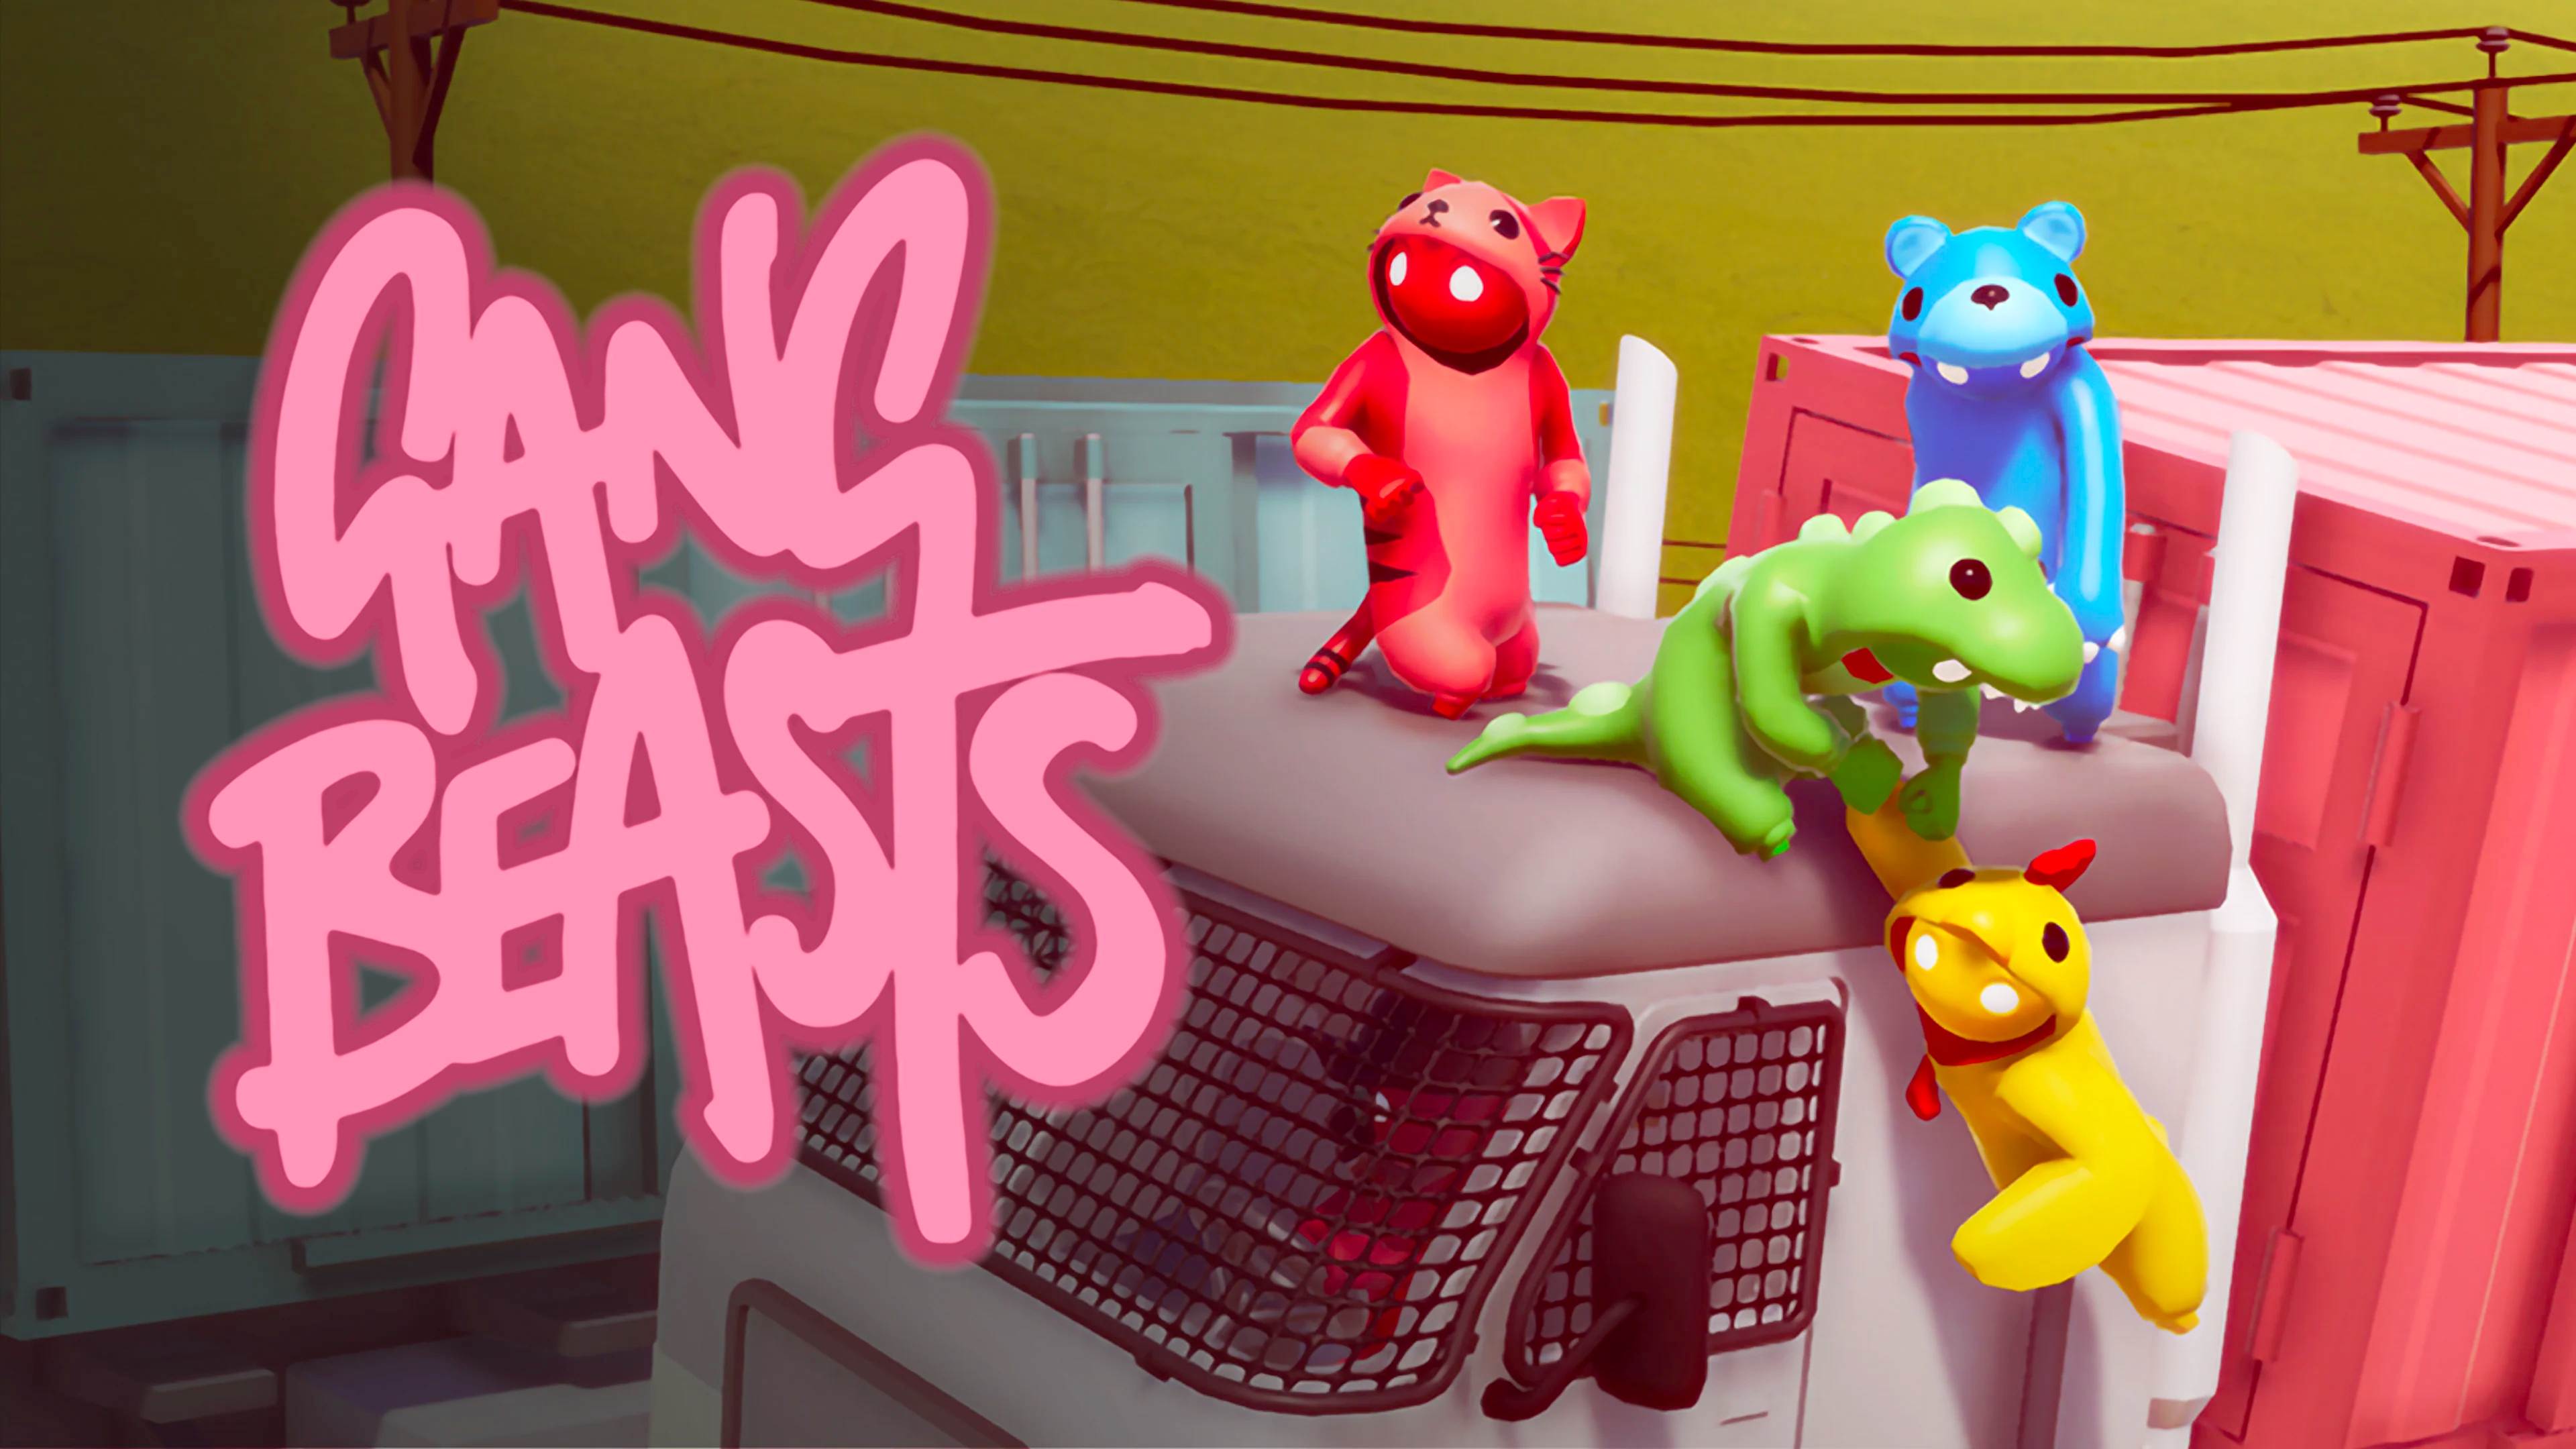 gang beasts switch release